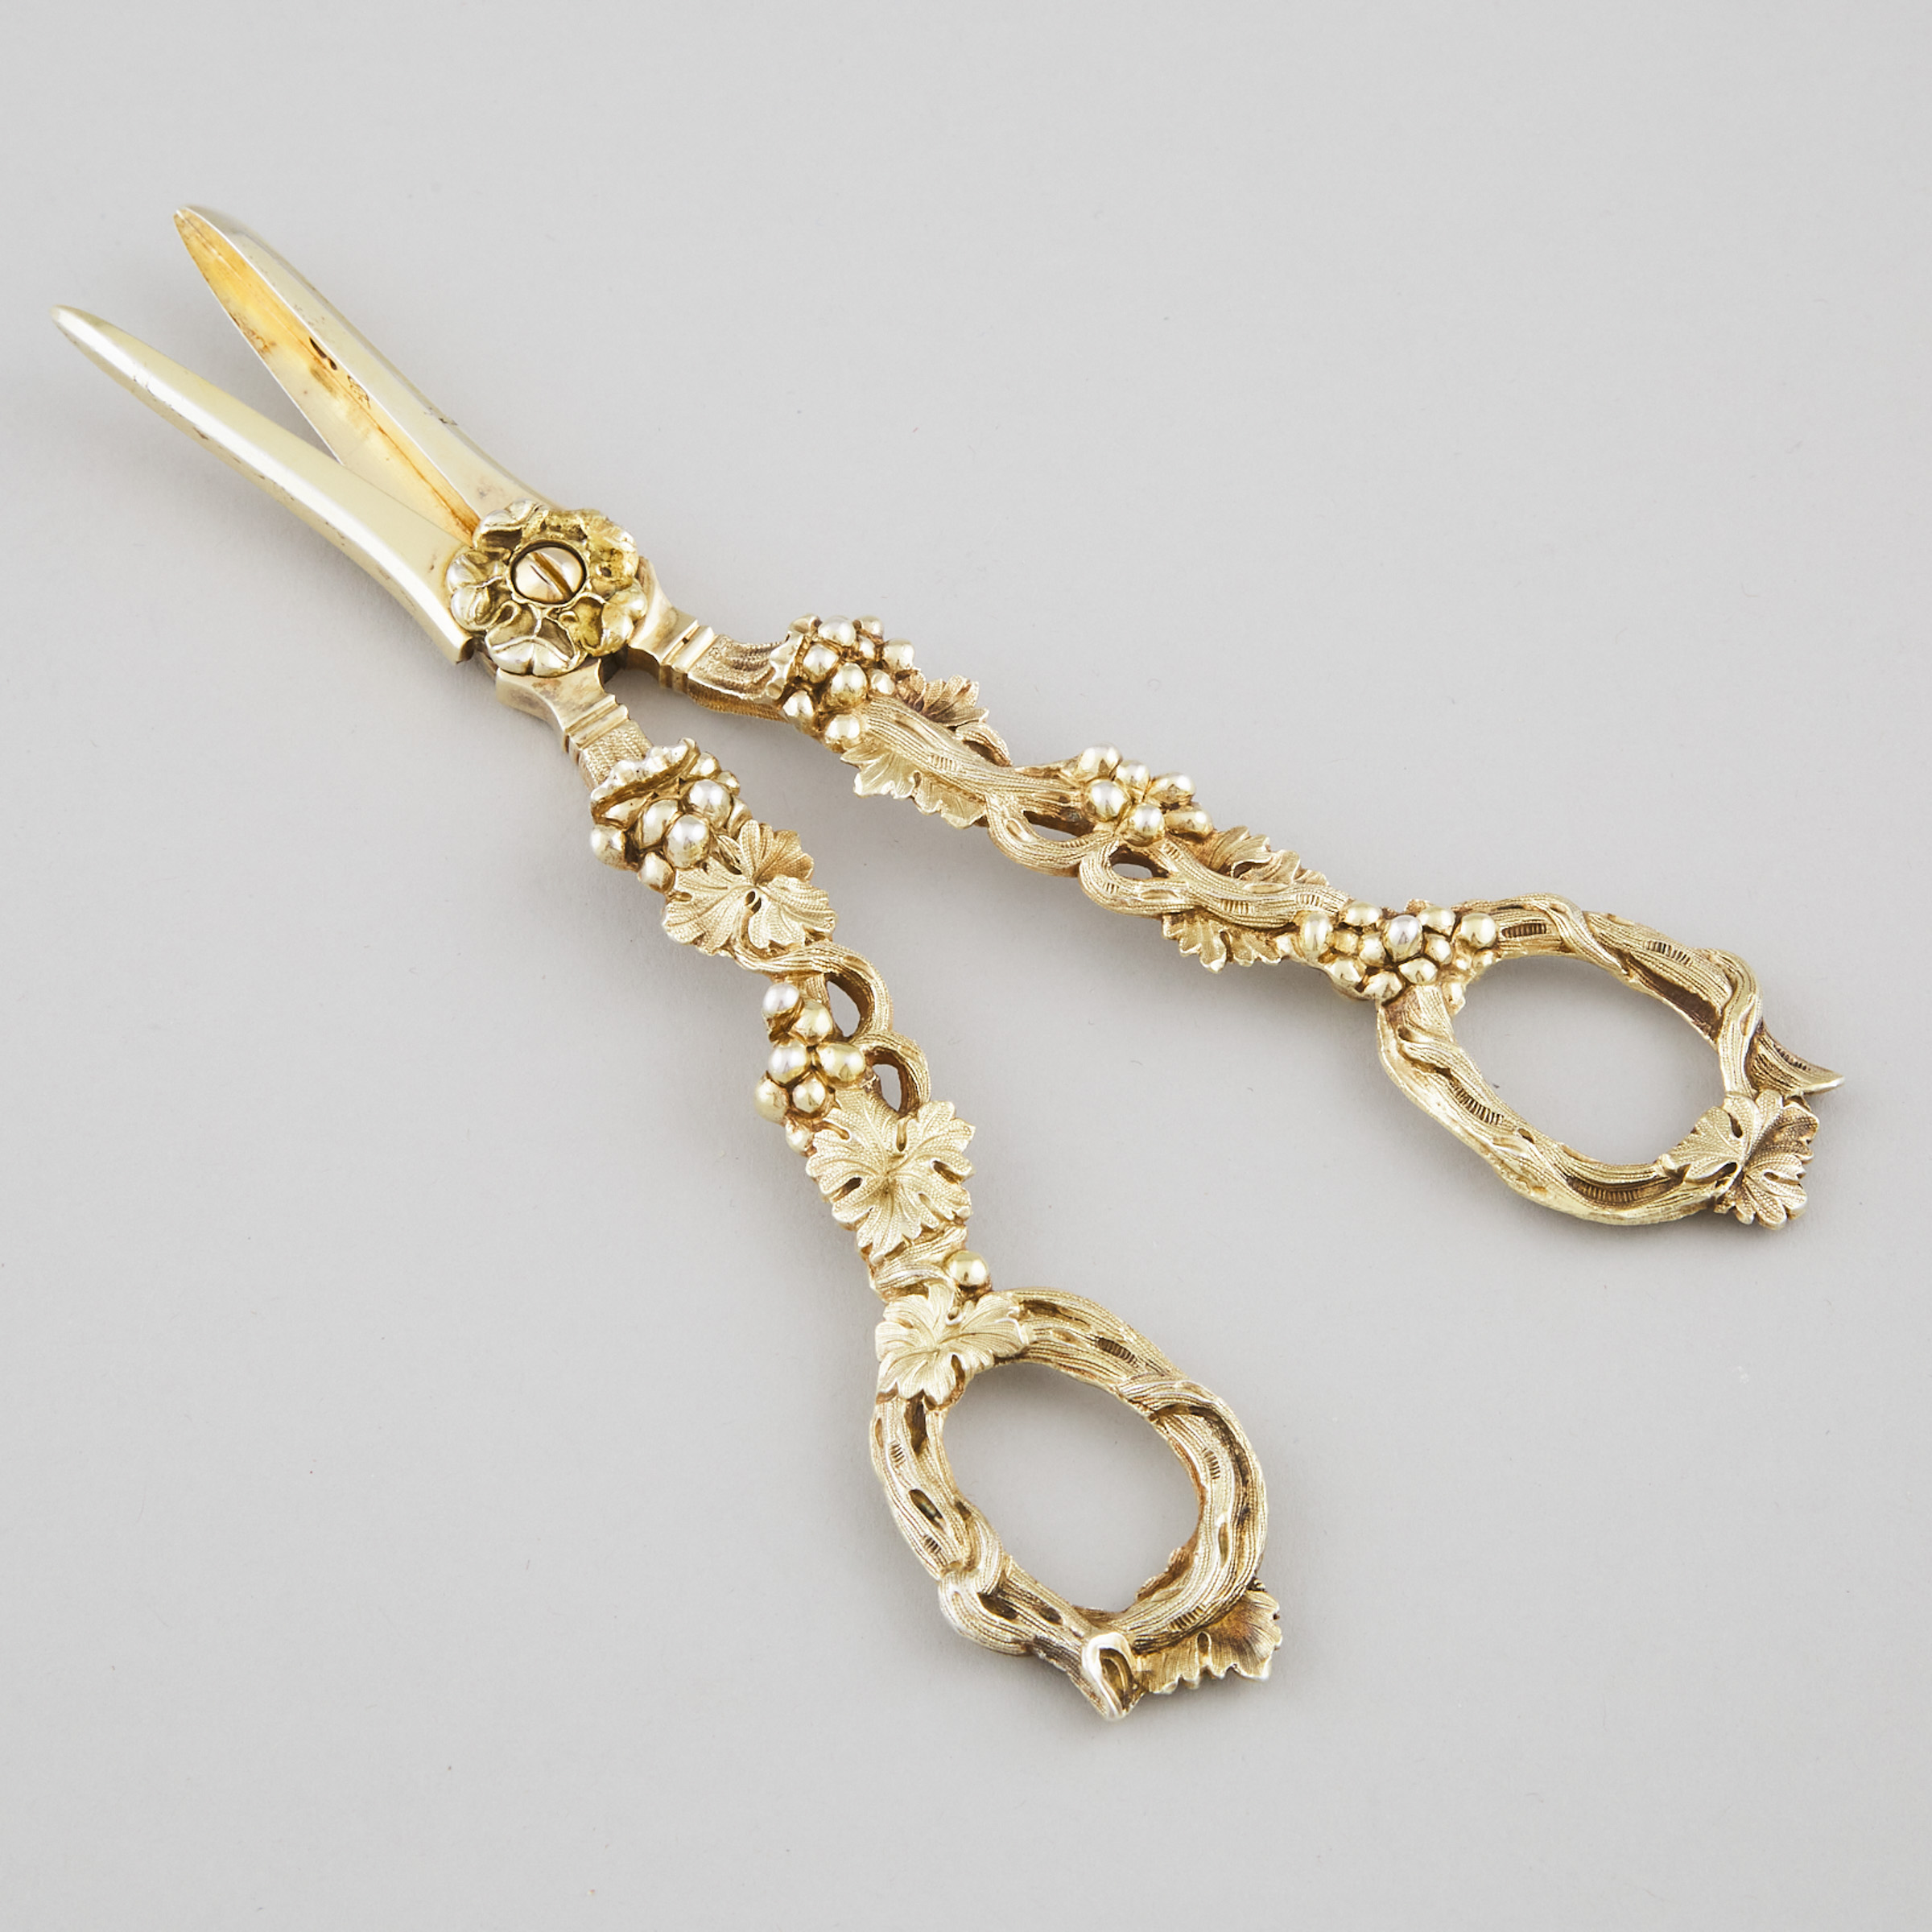 Early Victorian Silver-Gilt Grape Shears, Charles Reily & George Storer, London, 1837